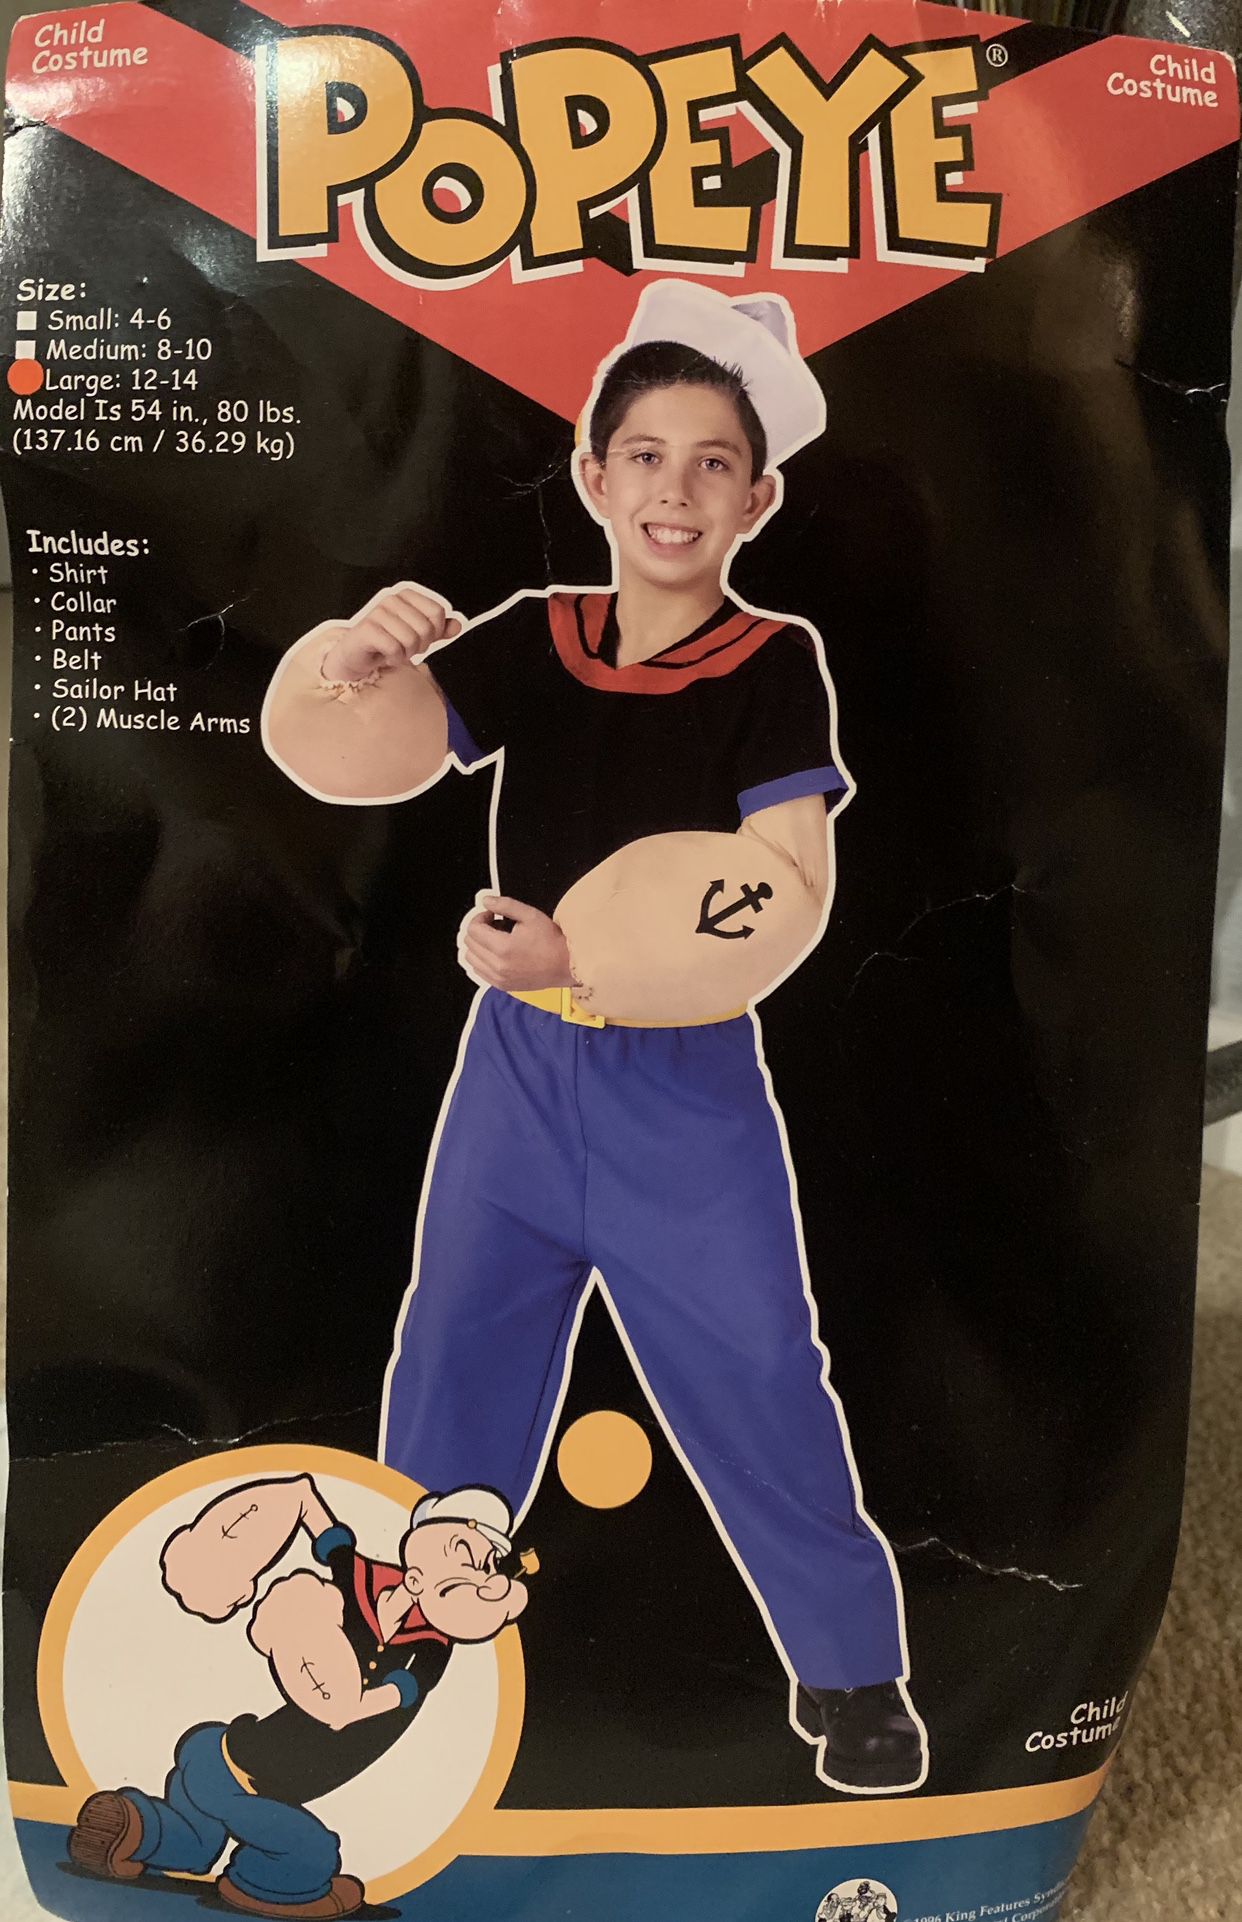 Halloween Child Costume Popeye Size Large 12-14 Comes With Pipe and Homemade Spinach